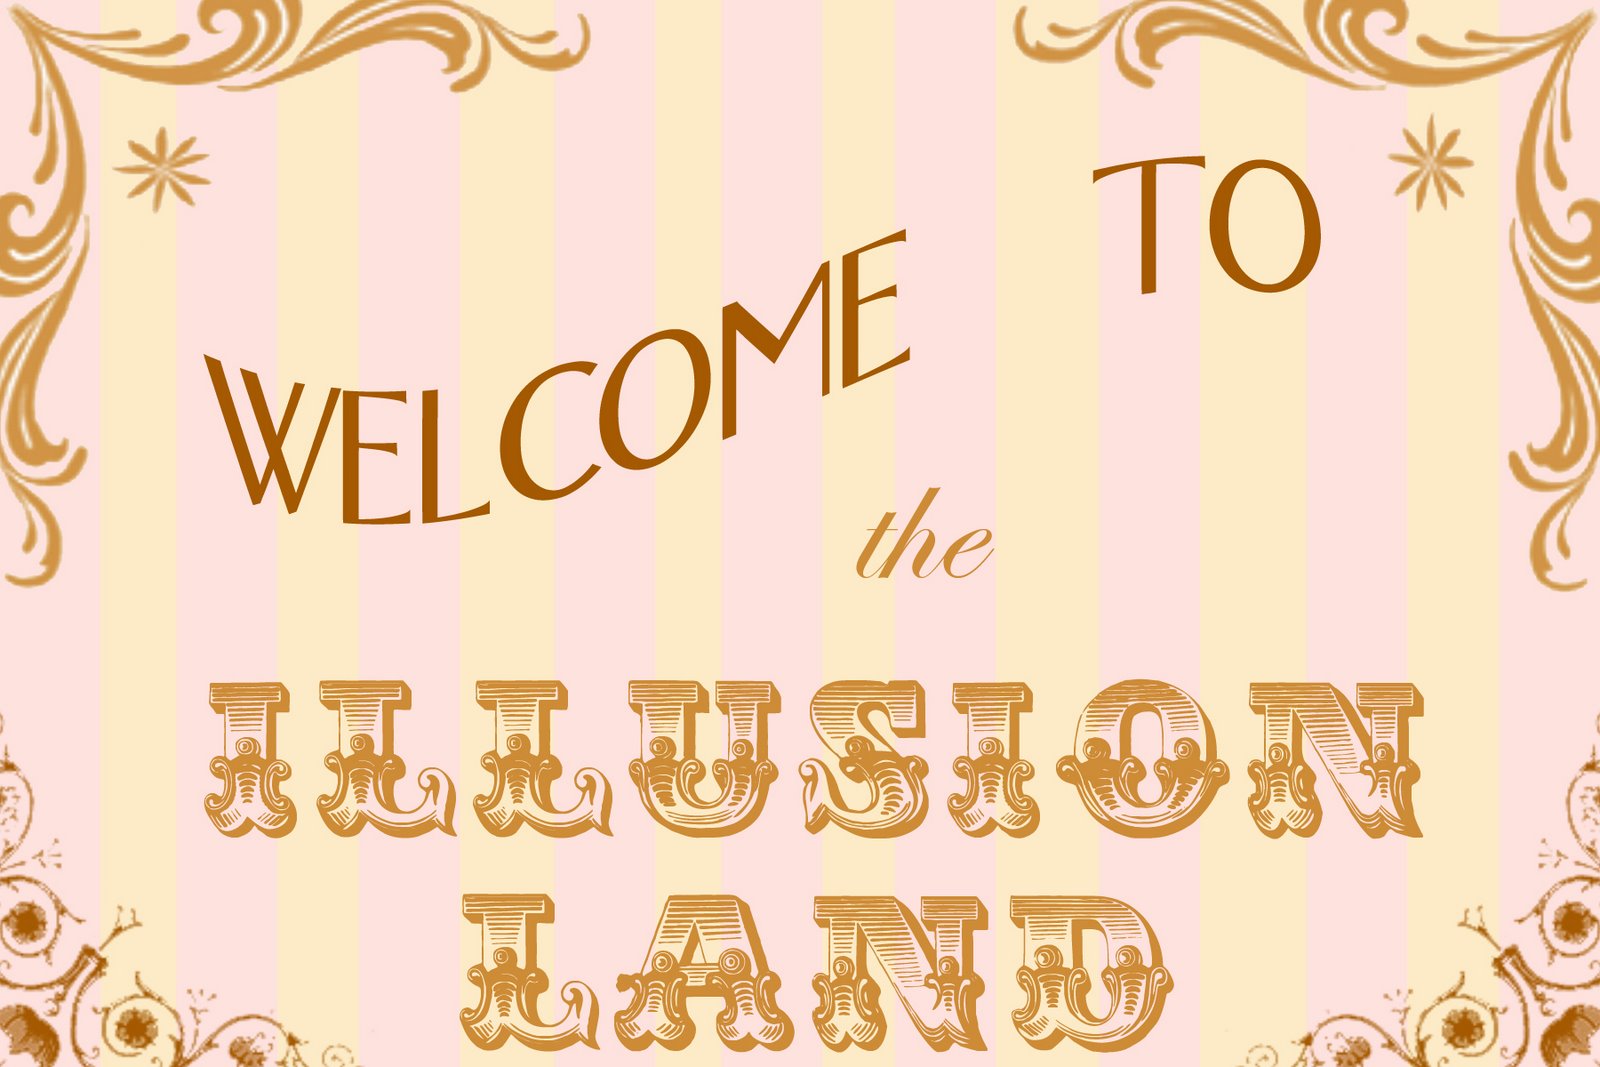 ~WELCOME TO THE ILLUSION LAND~